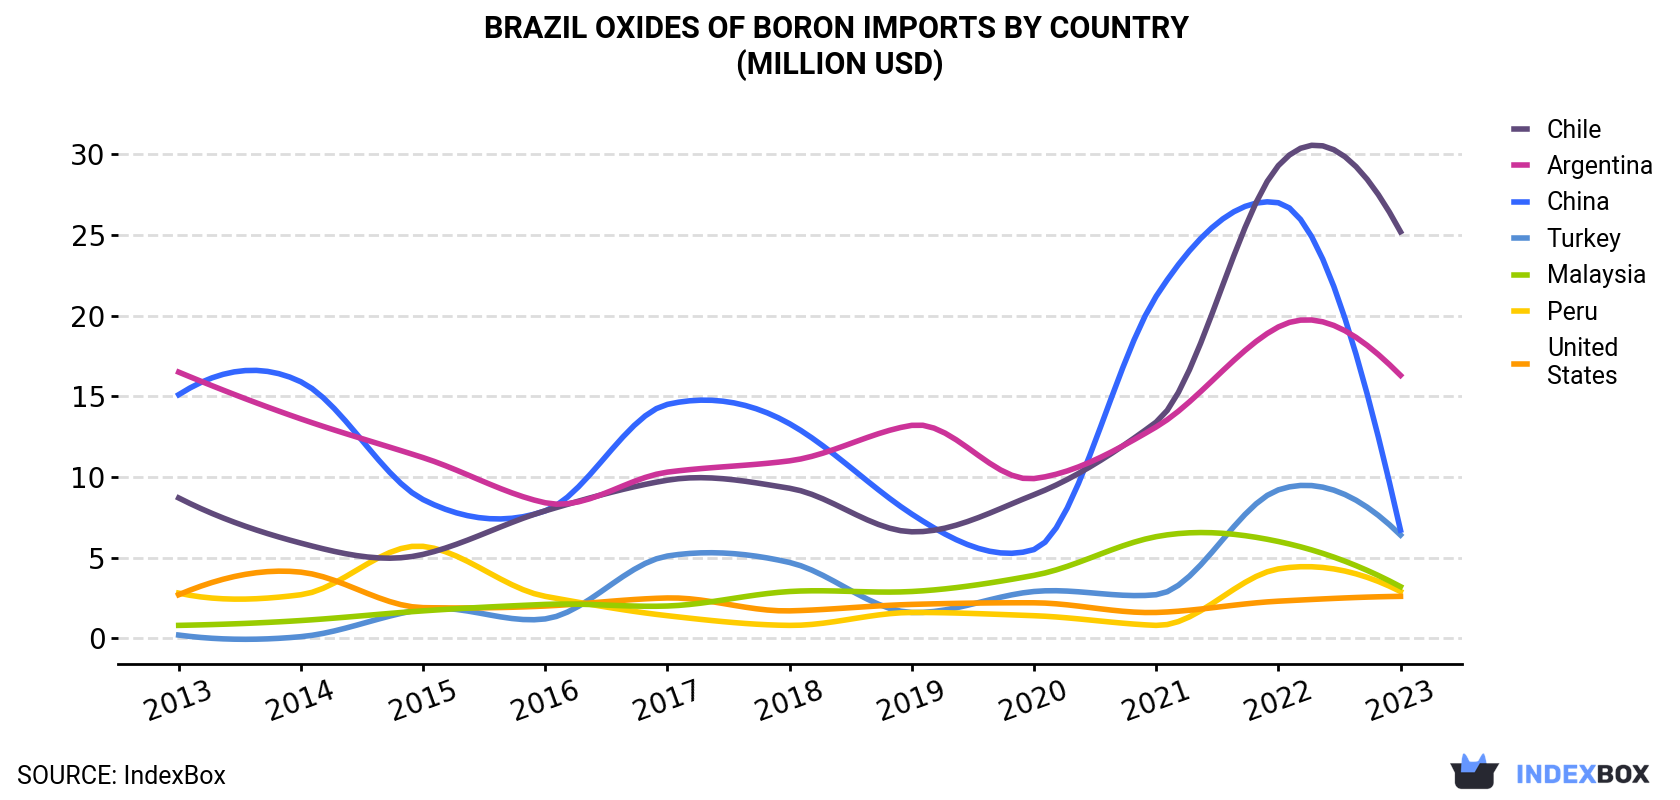 Brazil Oxides Of Boron Imports By Country (Million USD)